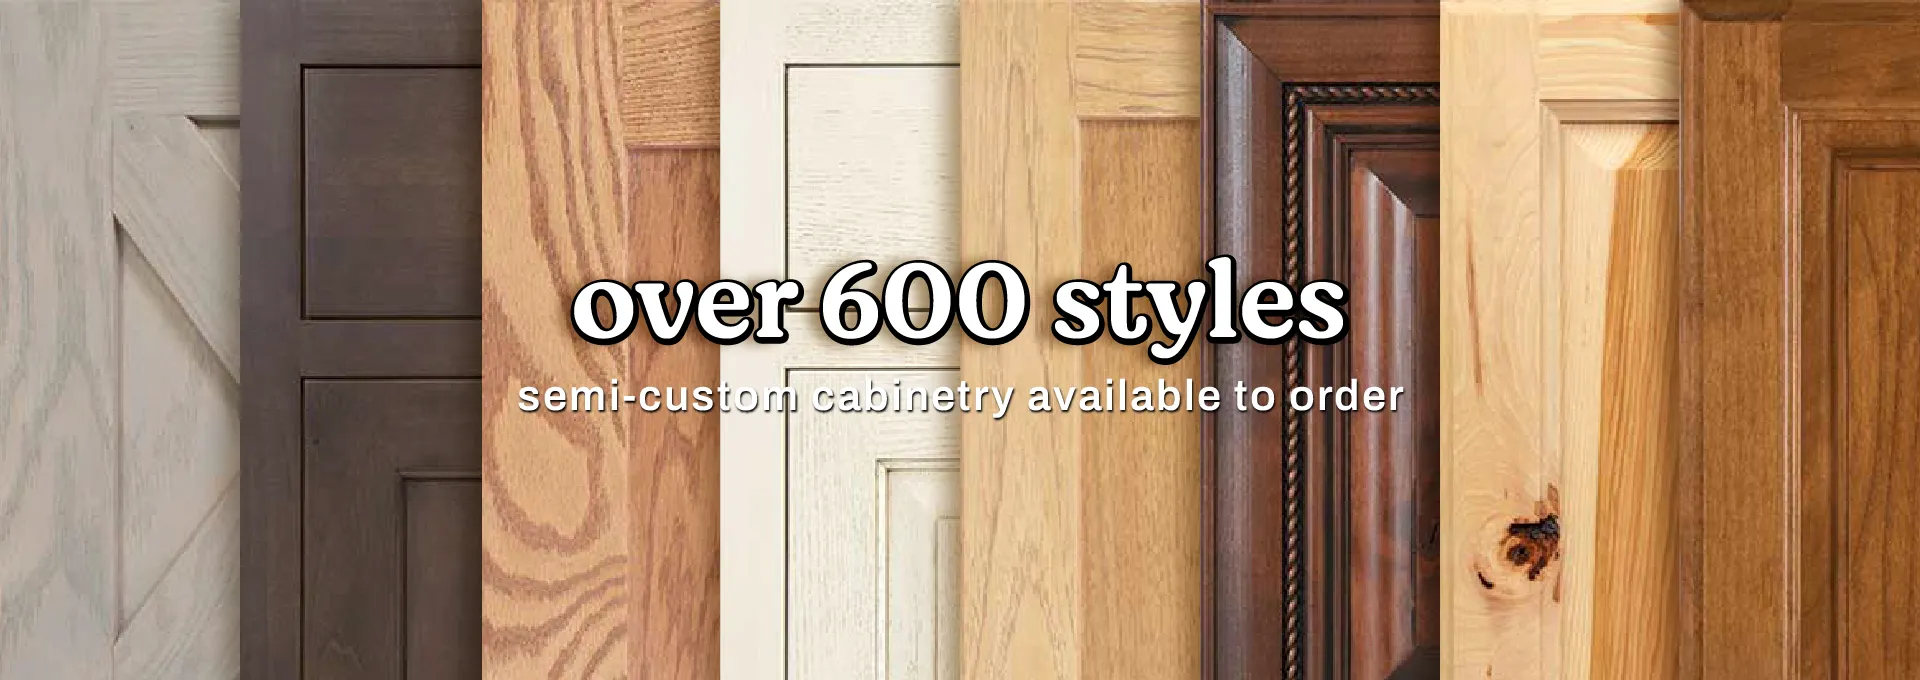 Semi-custom cabinetry available to order. Over 600 styles available!